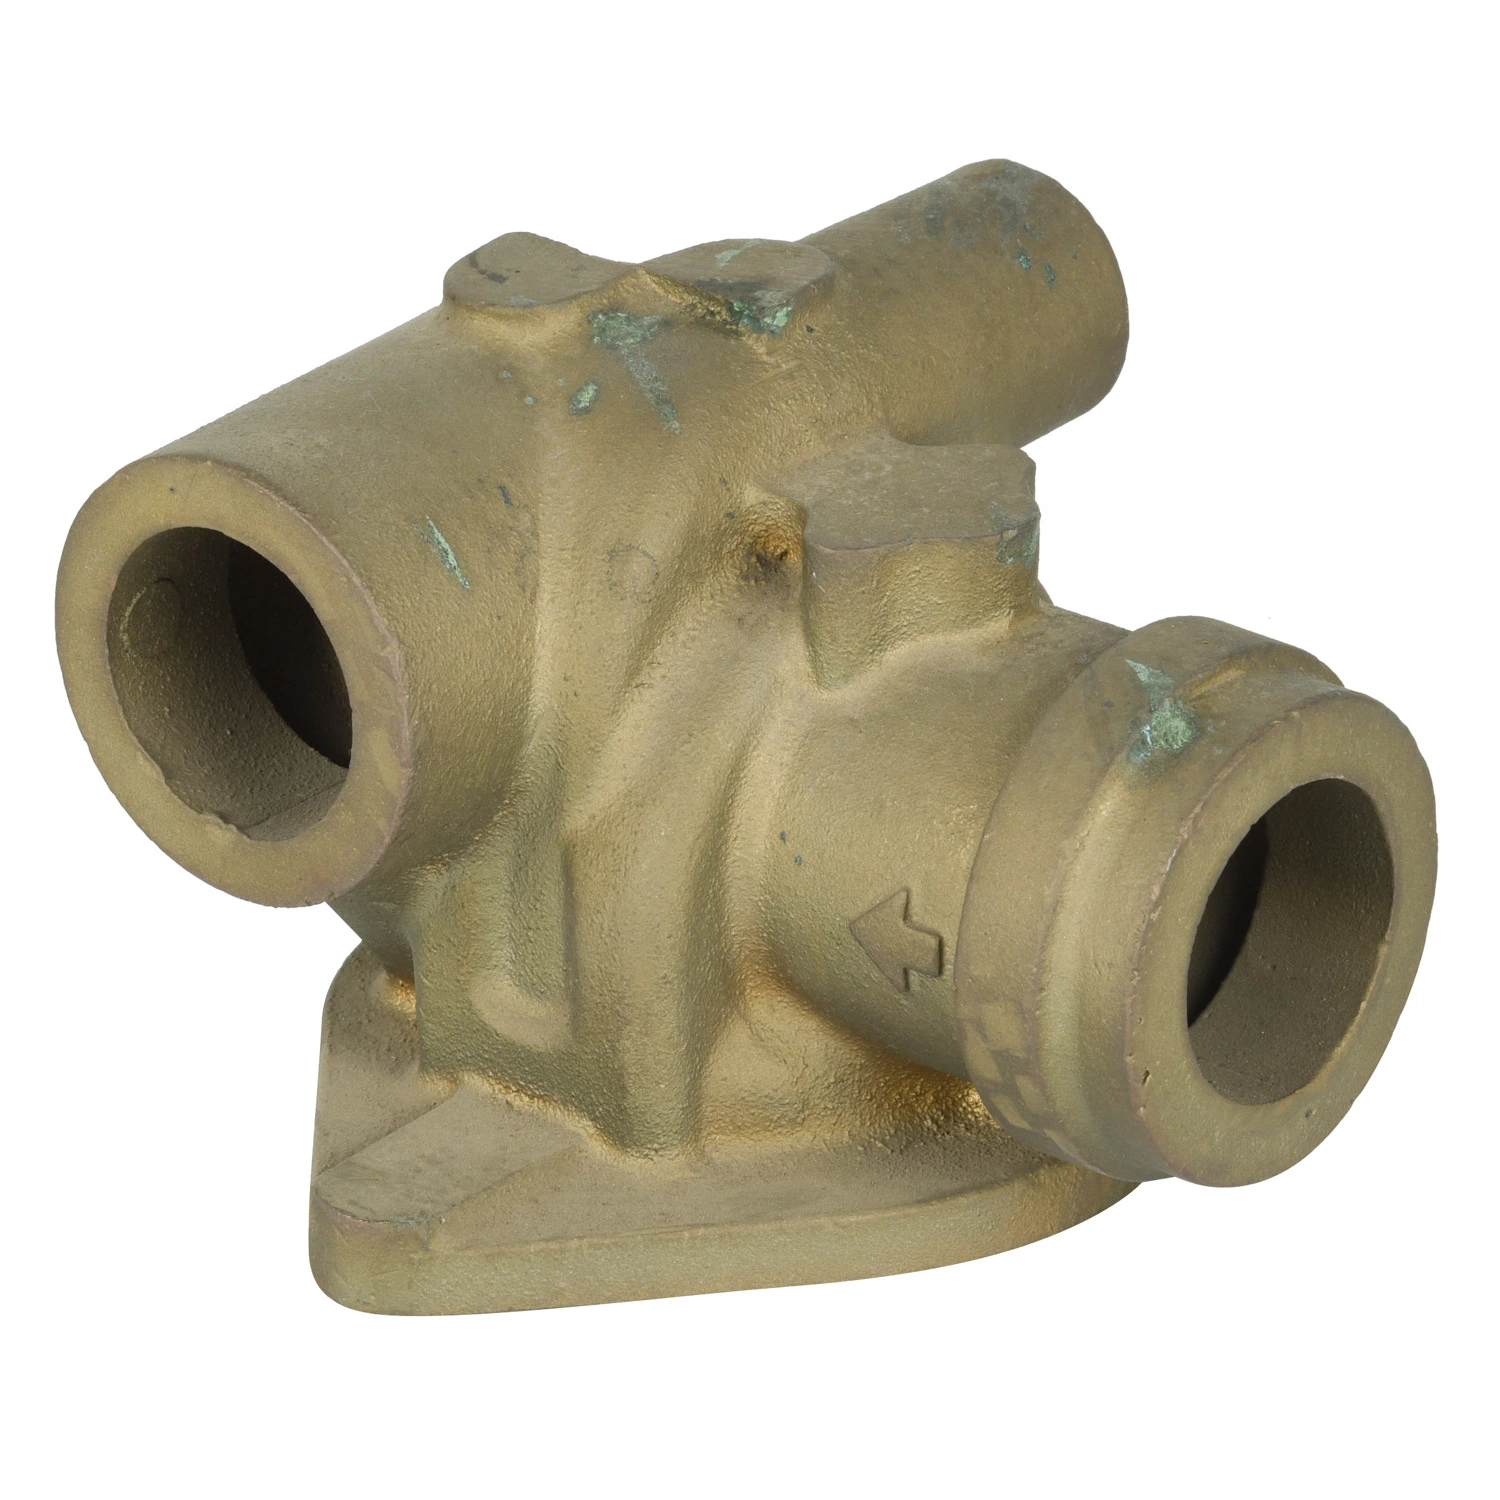 Antioxidant Clean and Hygienic Copper Sand Casting Valve Housing